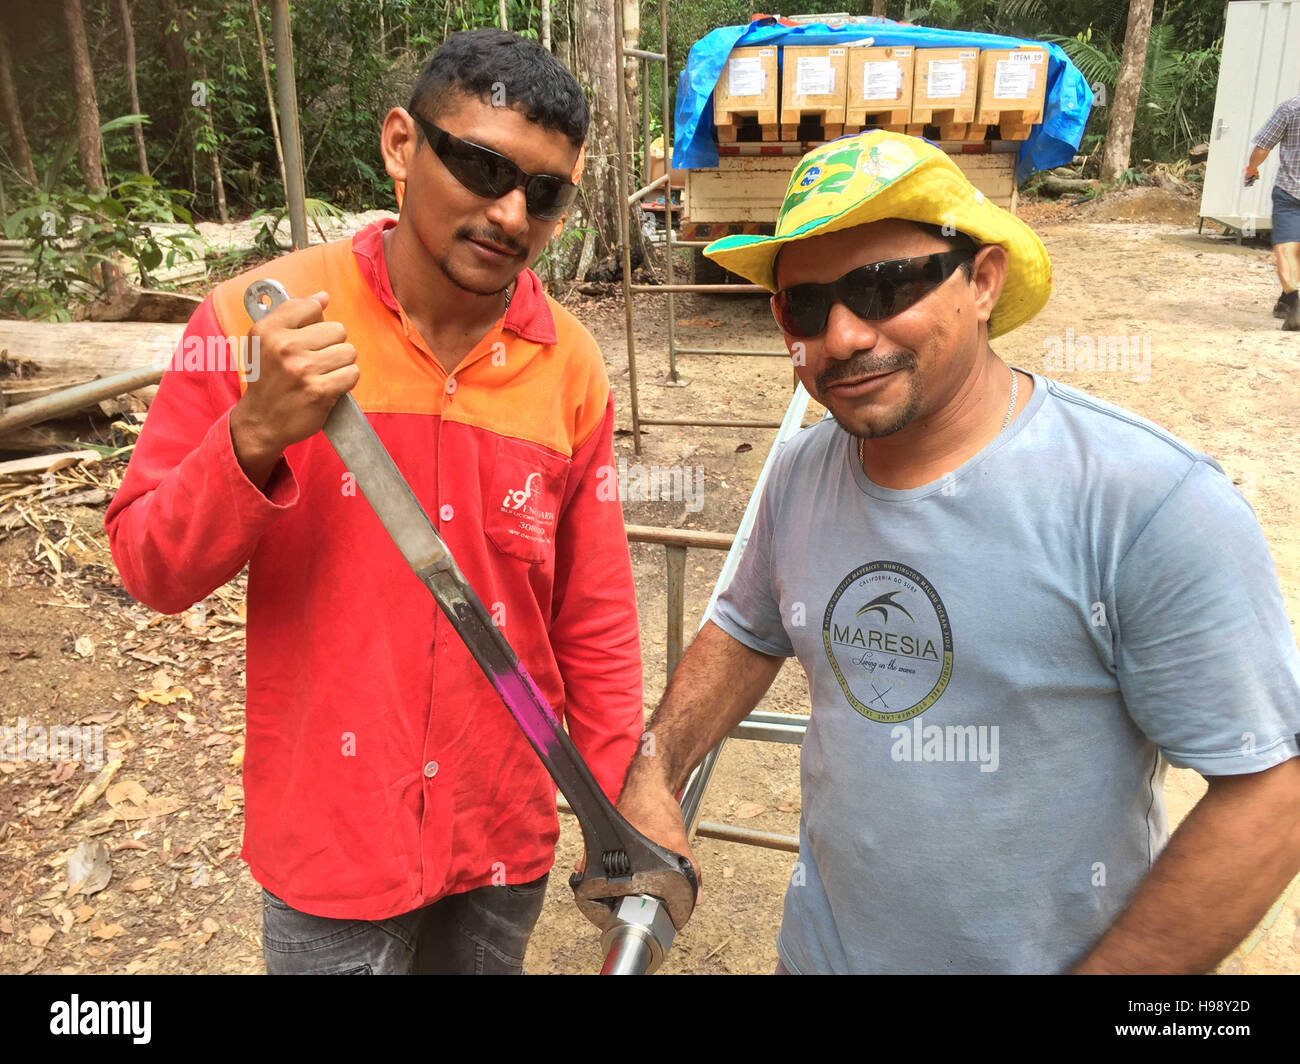 Manaus, Brazil. 7th Nov, 2016. The two Brazilian tower constructors Thiago Vasconcelos (l) and Elenaldo Palmer put together metal pipes for the ATTO tower at the ATTO research center in the rain forest in Manaus, Brazil, 7 November 2016. PHOTO: GEORG ISMAR/dpa/Alamy Live News Stock Photo